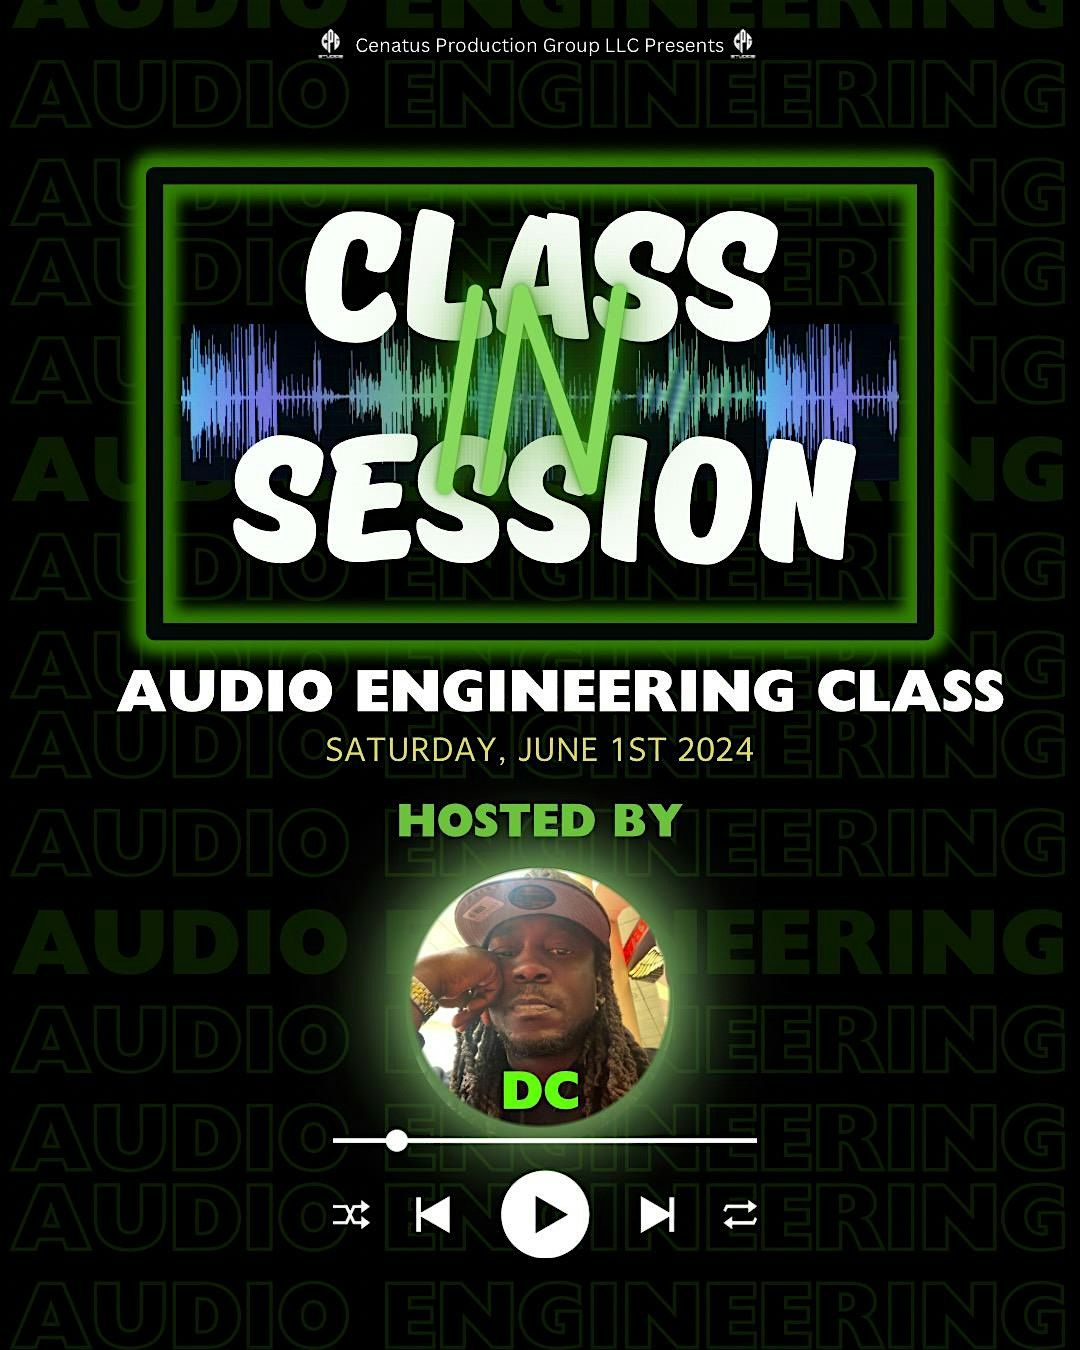 Class "IN" Session (Audio Engineer Class)